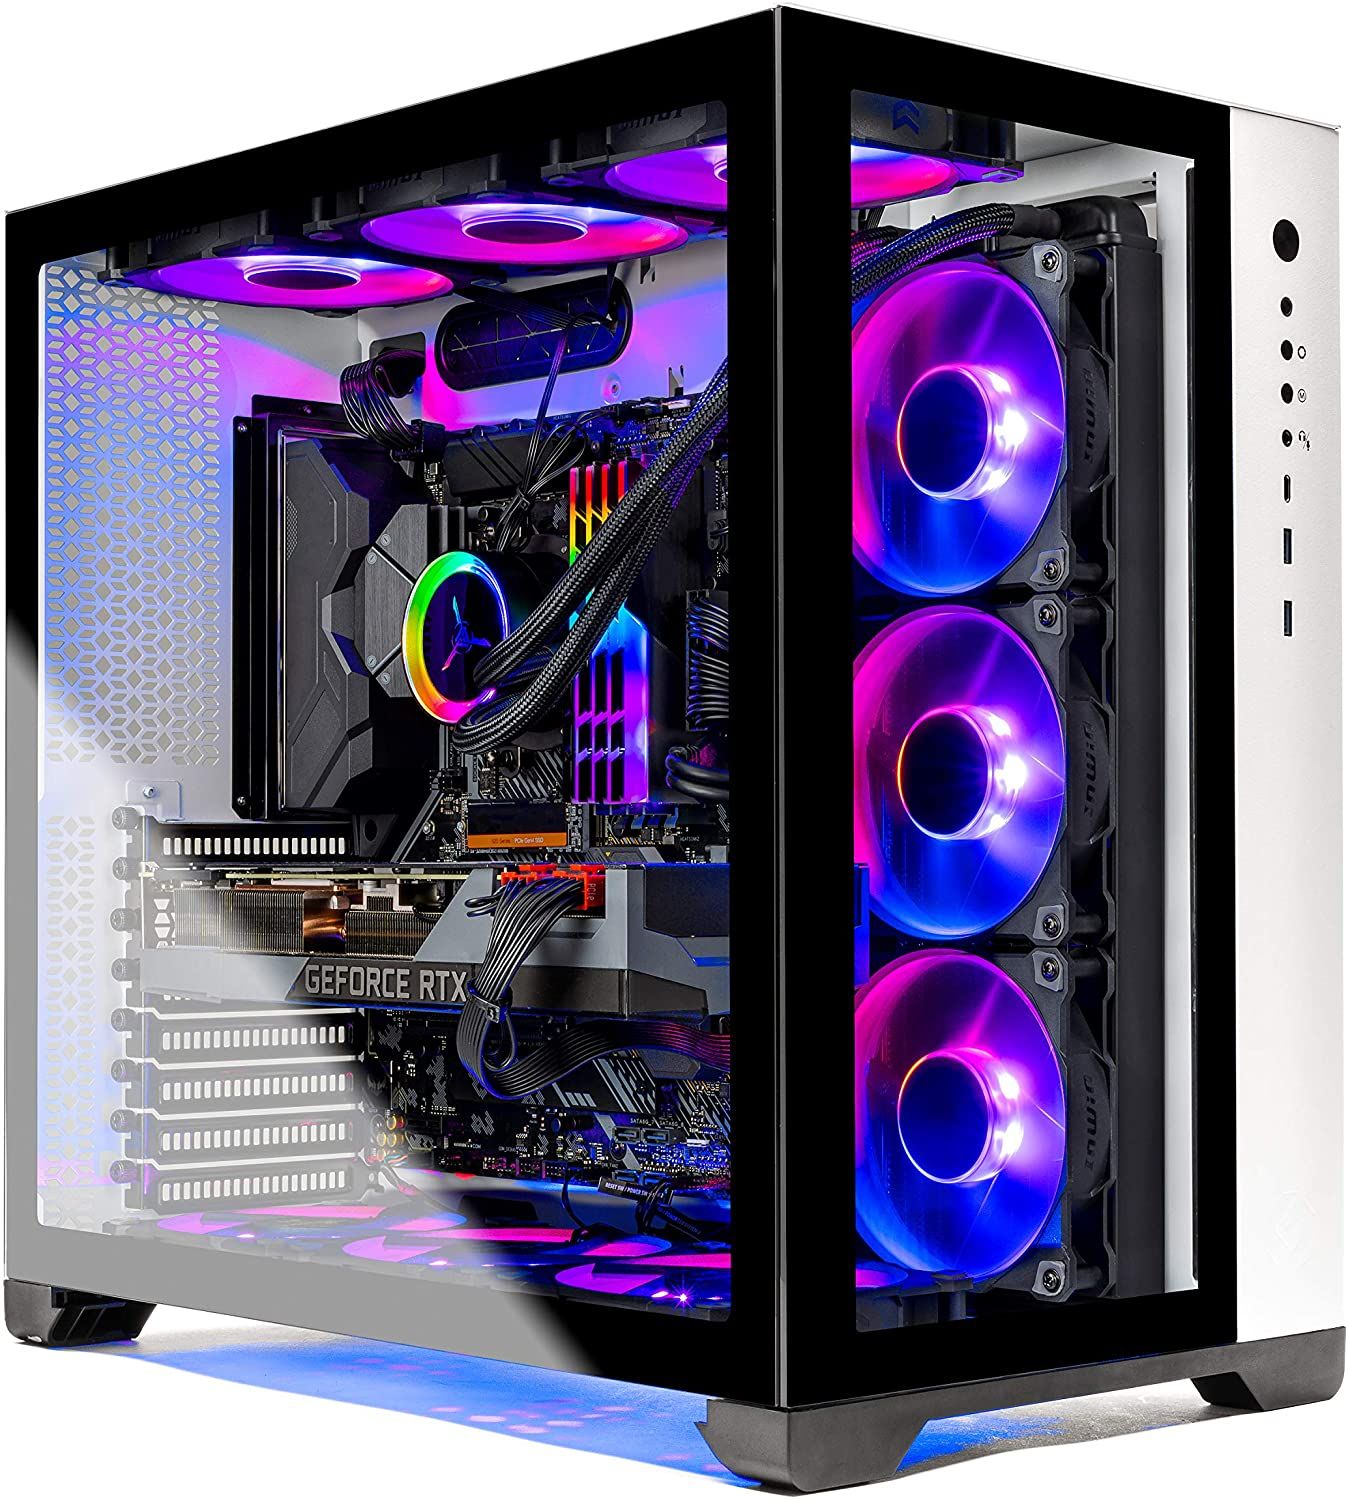 Skytech Prism II product image of a white and black PC with clear front and side panels showcasing blue and pink lit-up parts inside.